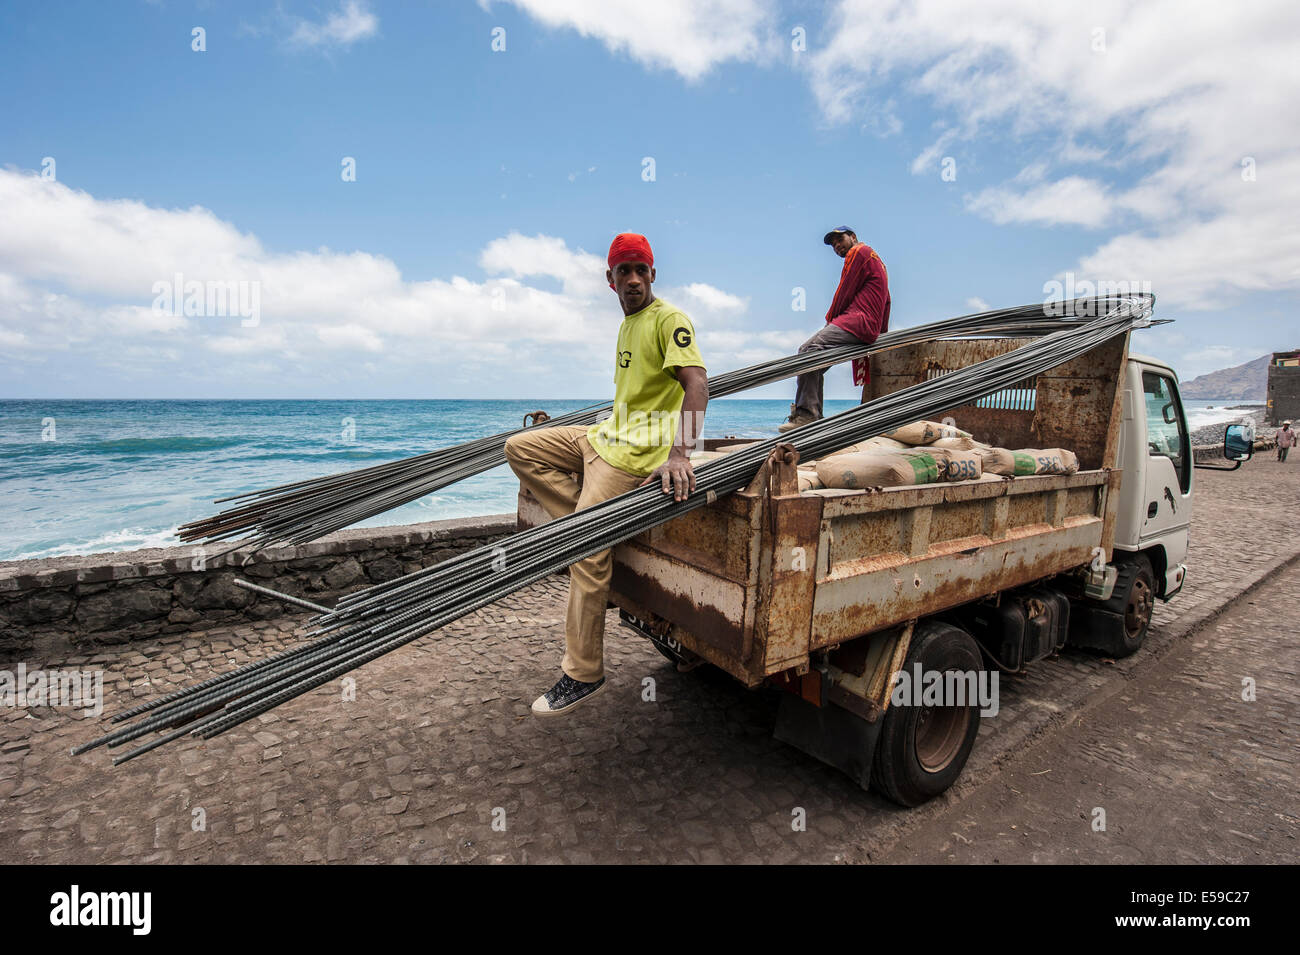 Workers unloading a heavy truck in village called Paul on Santo Antao Island, Cape Verde Stock Photo